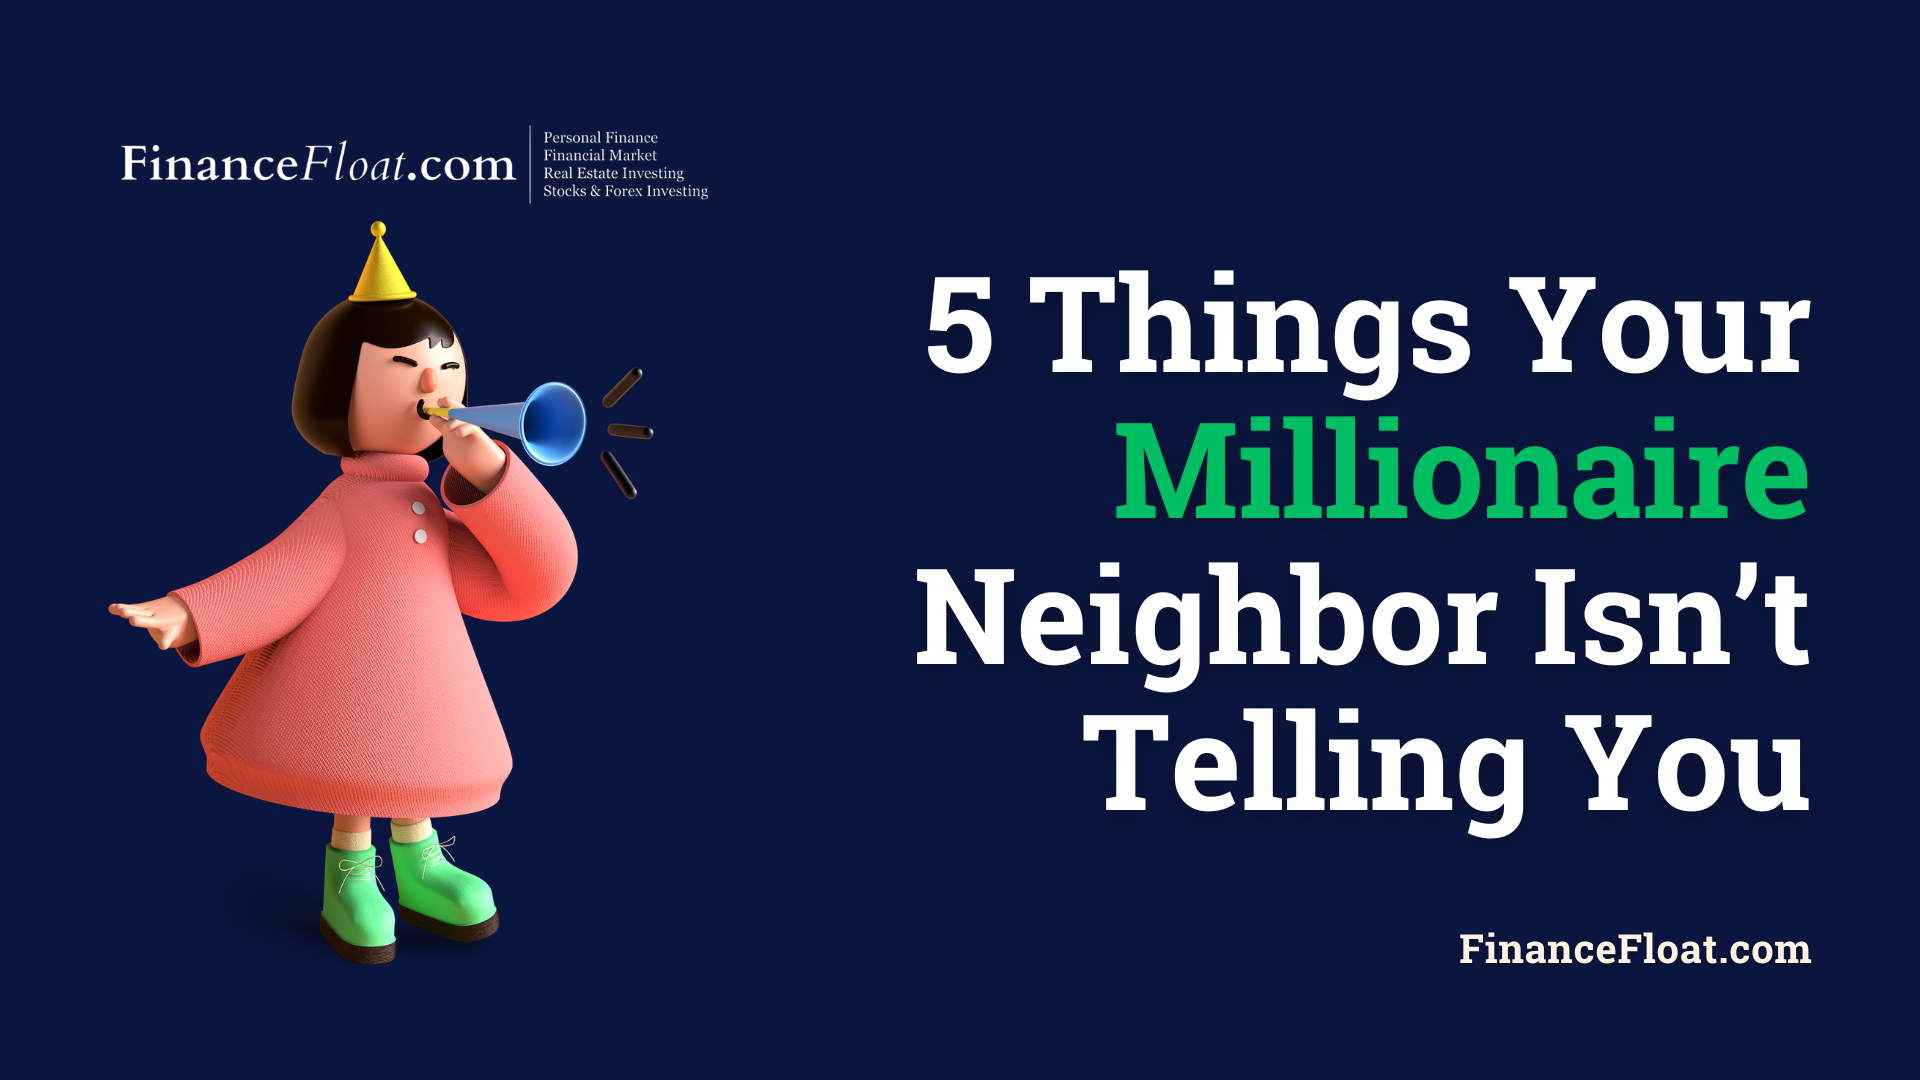 5 Things Your Millionaires Neighbor Isn’t Telling You